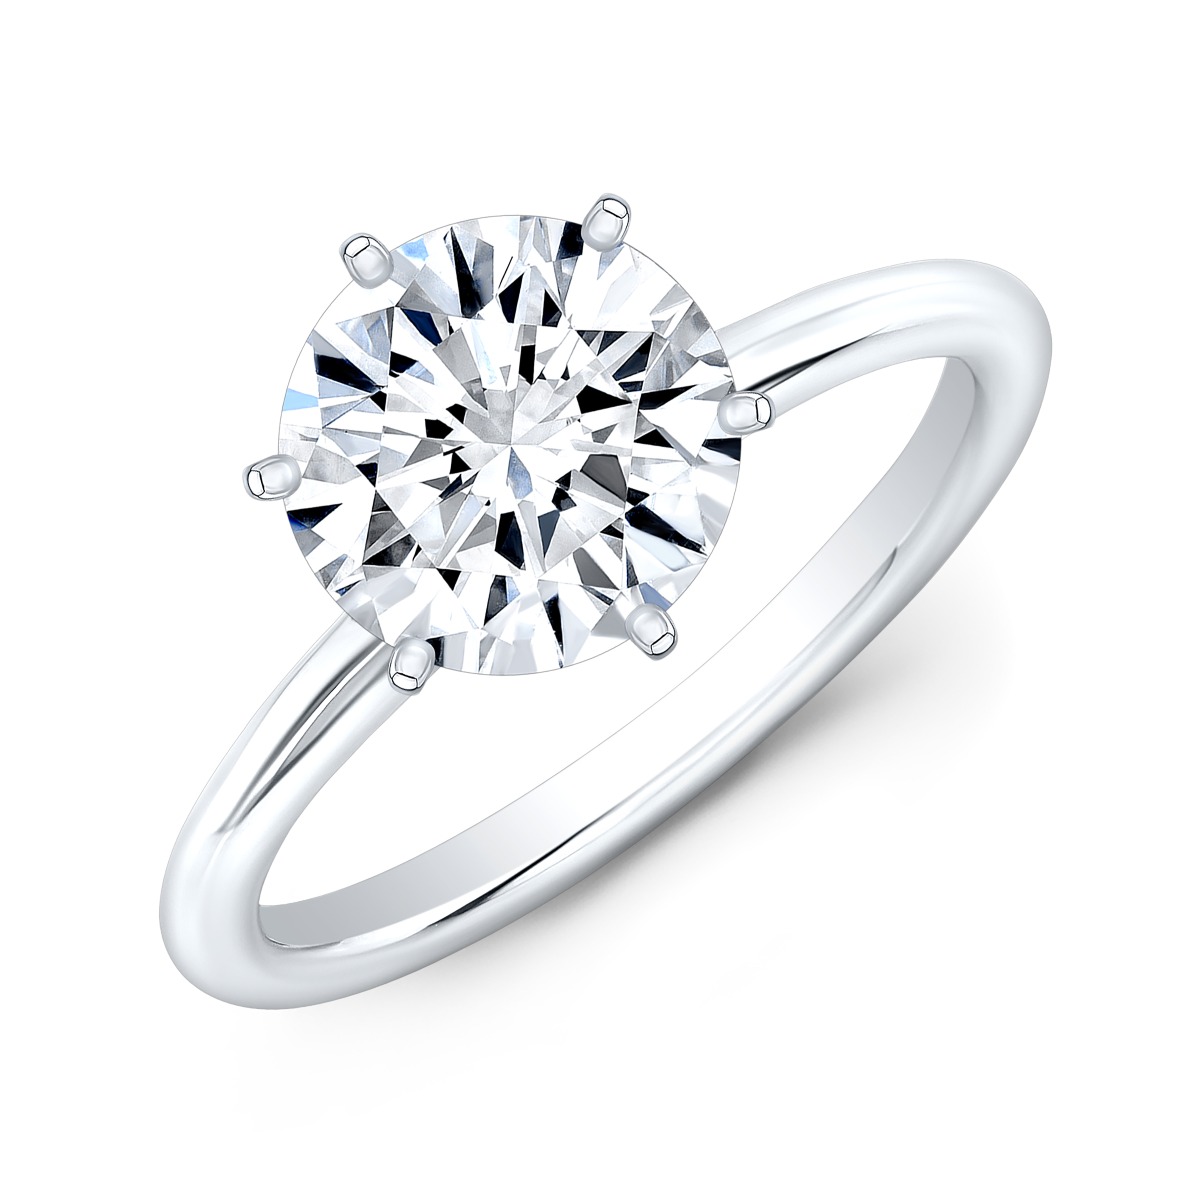 6 Prong Solitaire Diamond Engagement Ring